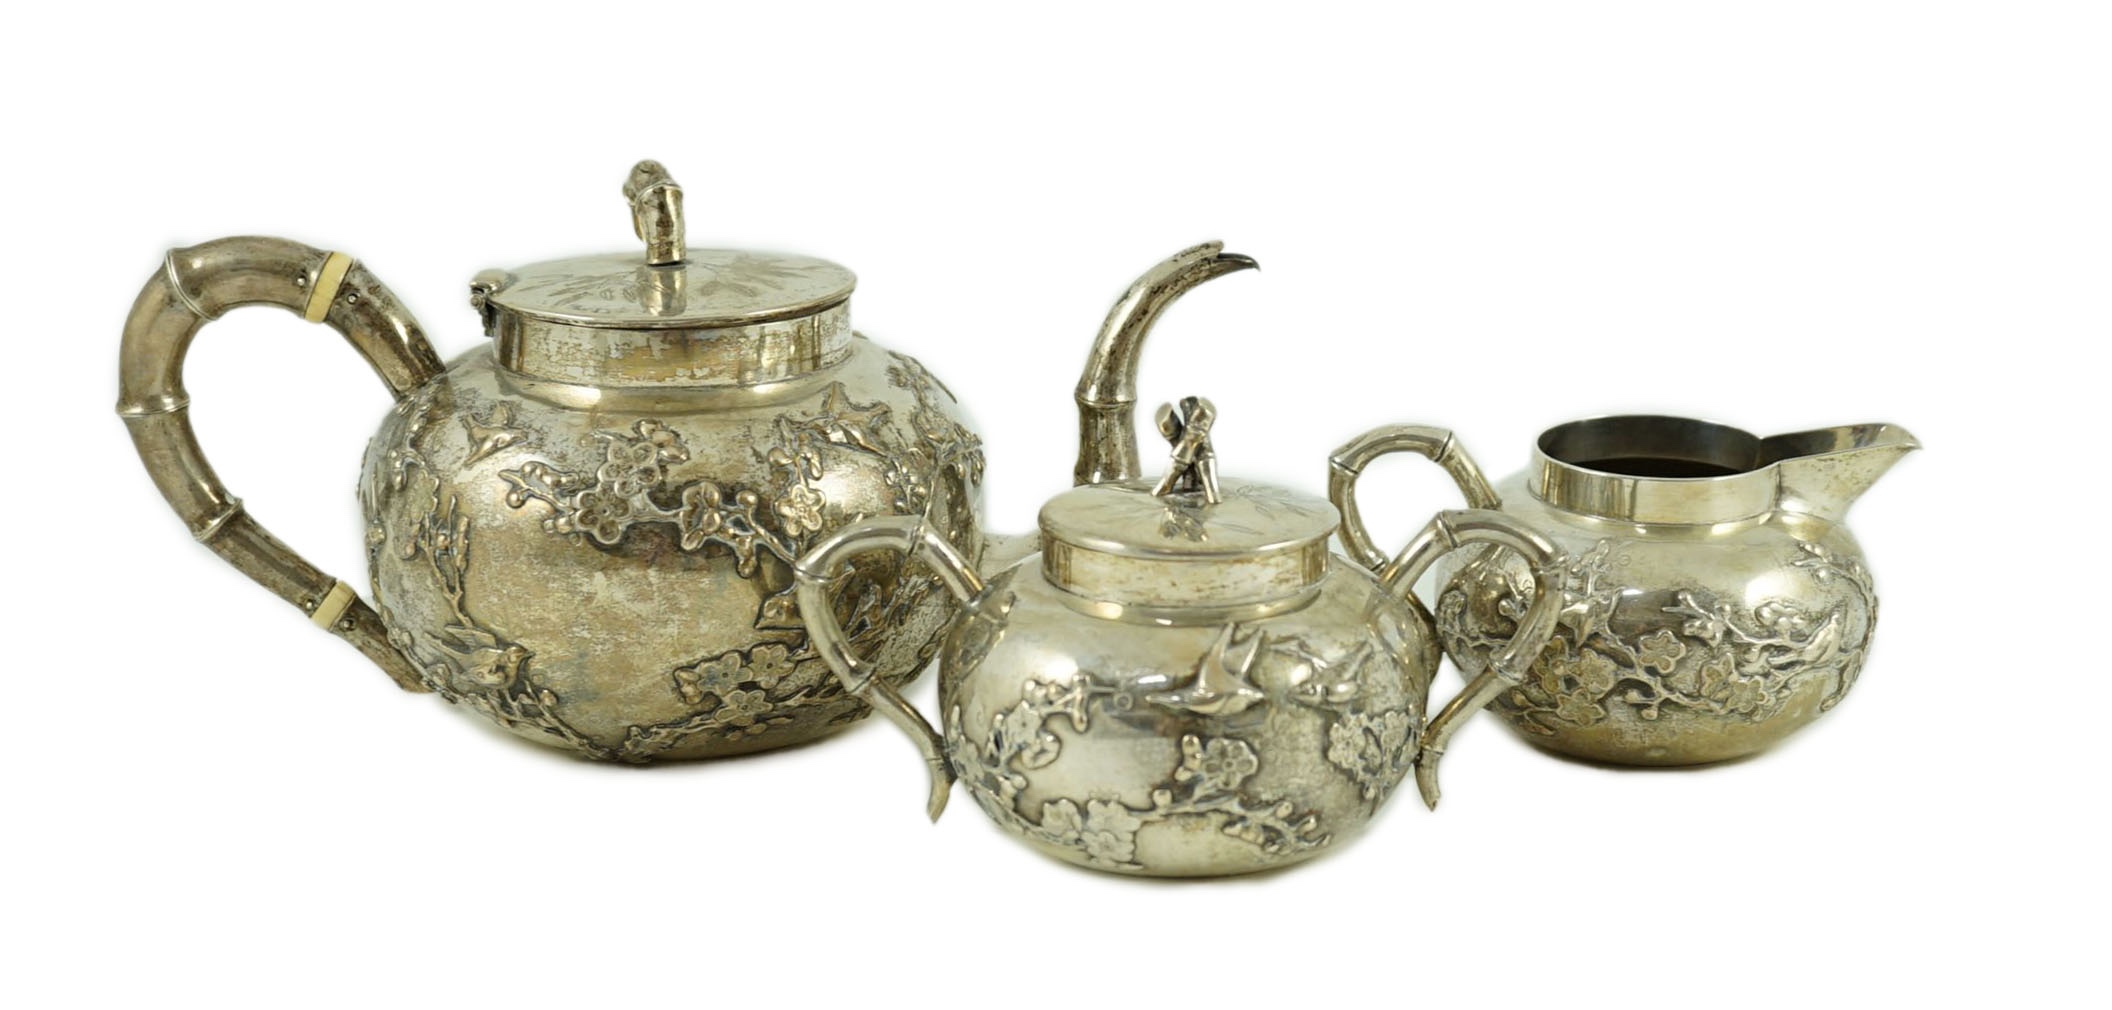 A 19th century Chinese Export silver three piece tea set by Cumshing?